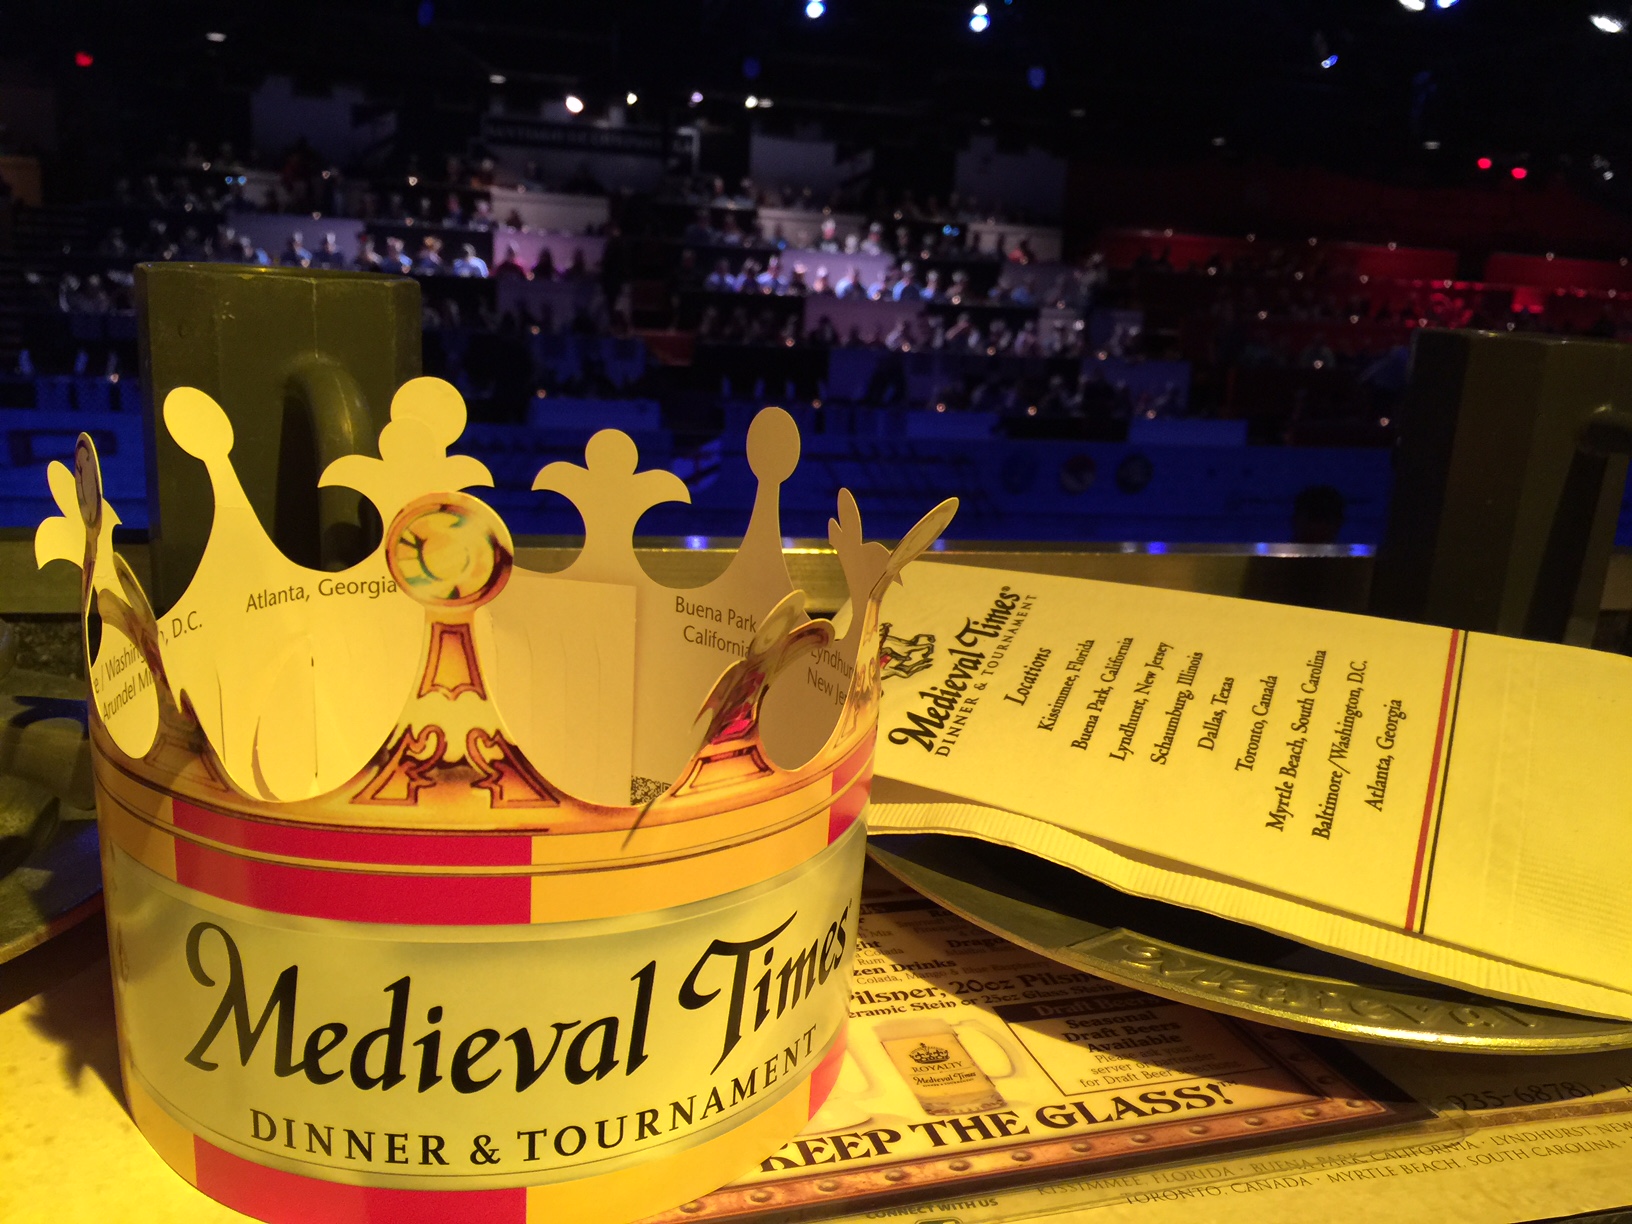 medieval times dinner show orlando florida | acupful.com | tips for medieval times | visit orlando | family travel florida | things to do with kids in orlando | mandy carter | Medieval Times menu | #MTfan